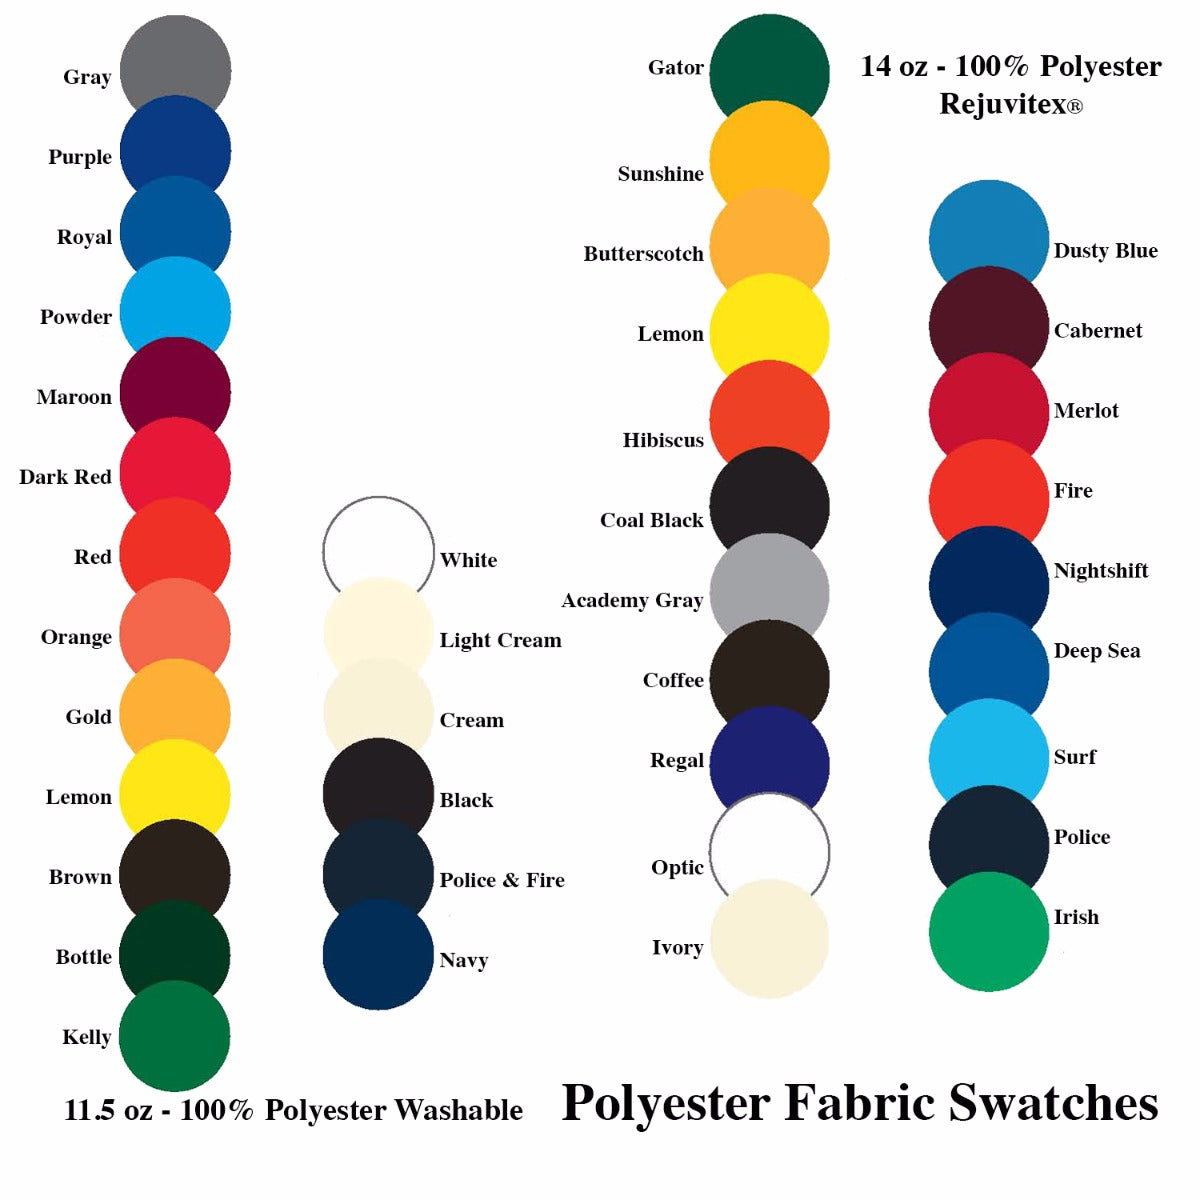 Polyester Fabric Swatches